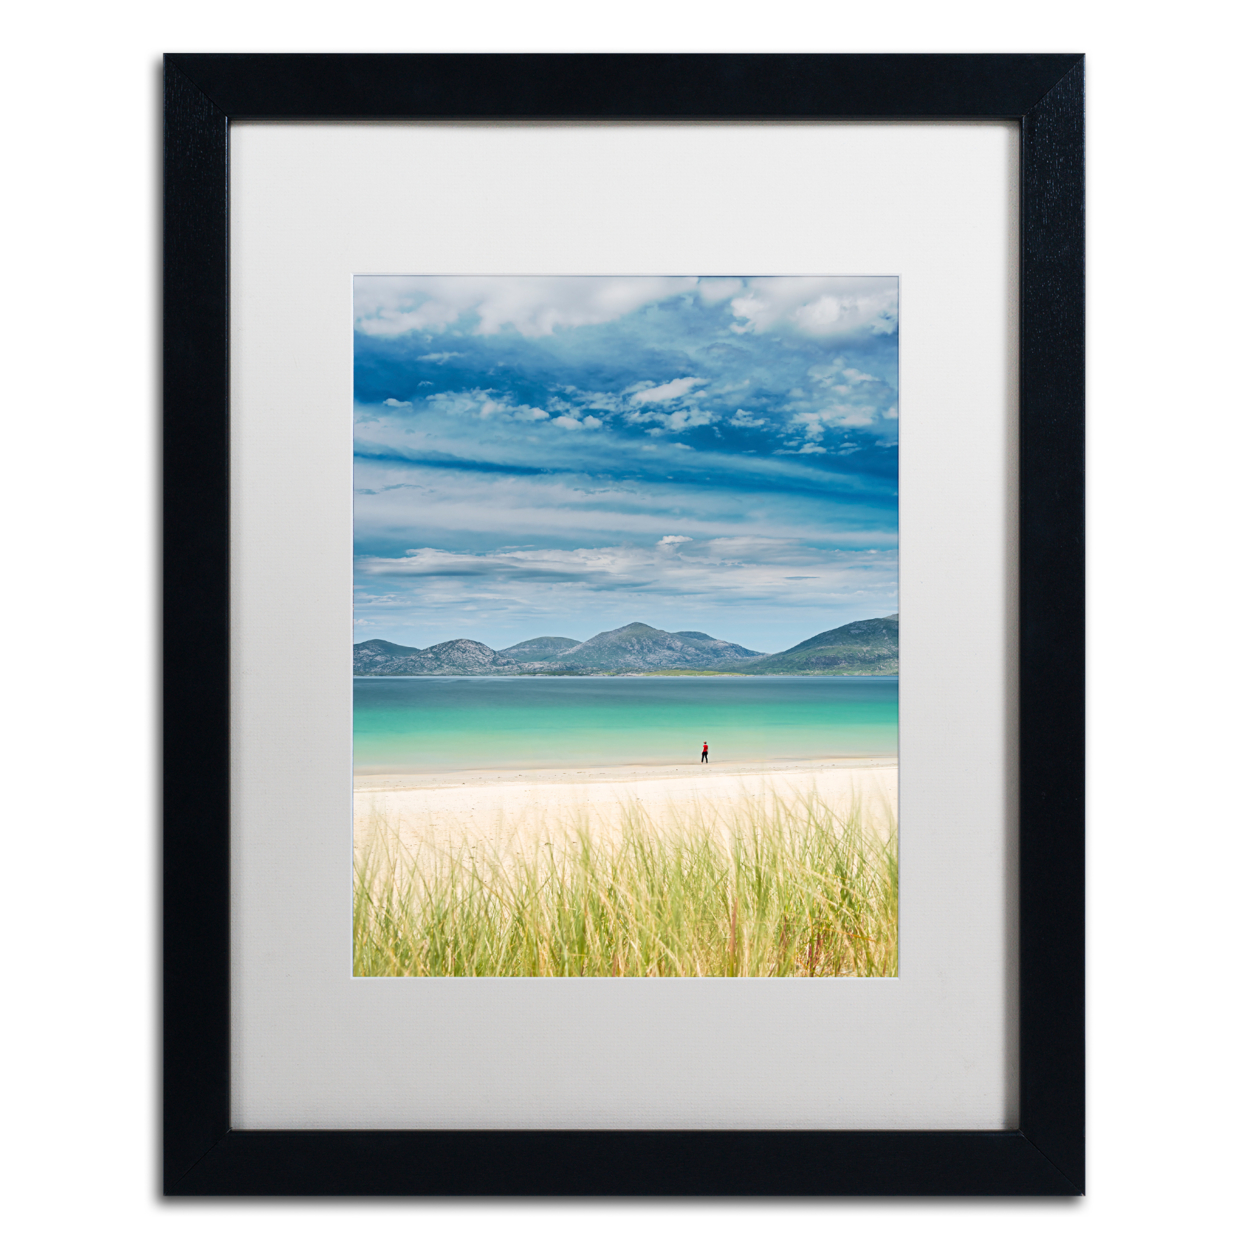 Michael Blanchette Photography 'Cautious Swimmer' Black Wooden Framed Art 18 X 22 Inches